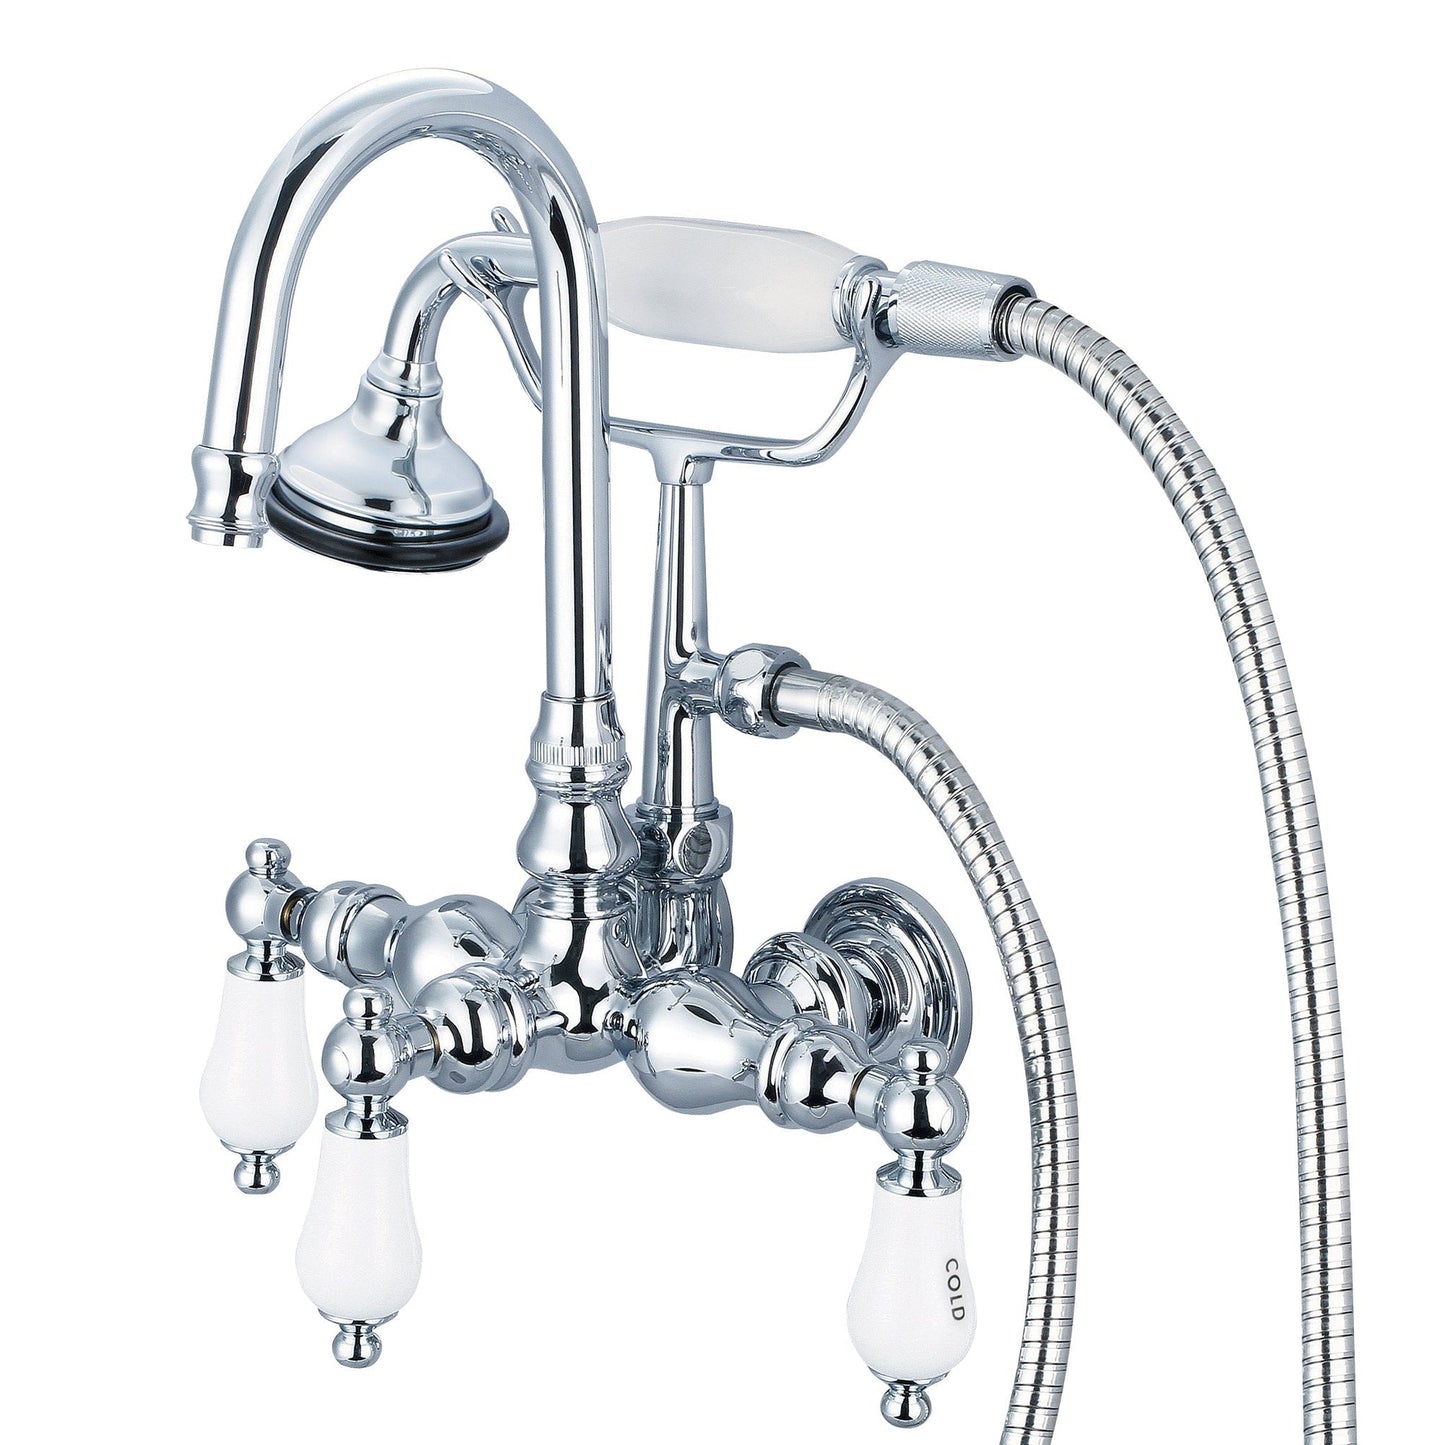 Water Creation Vintage Classic Center Wall Mount Tub F6-0012 9.25" Silver Solid Brass Faucet With Gooseneck Spout, Straight Wall Connector And Handheld Shower And Porcelain Lever Handles, Hot And Cold Labels Included